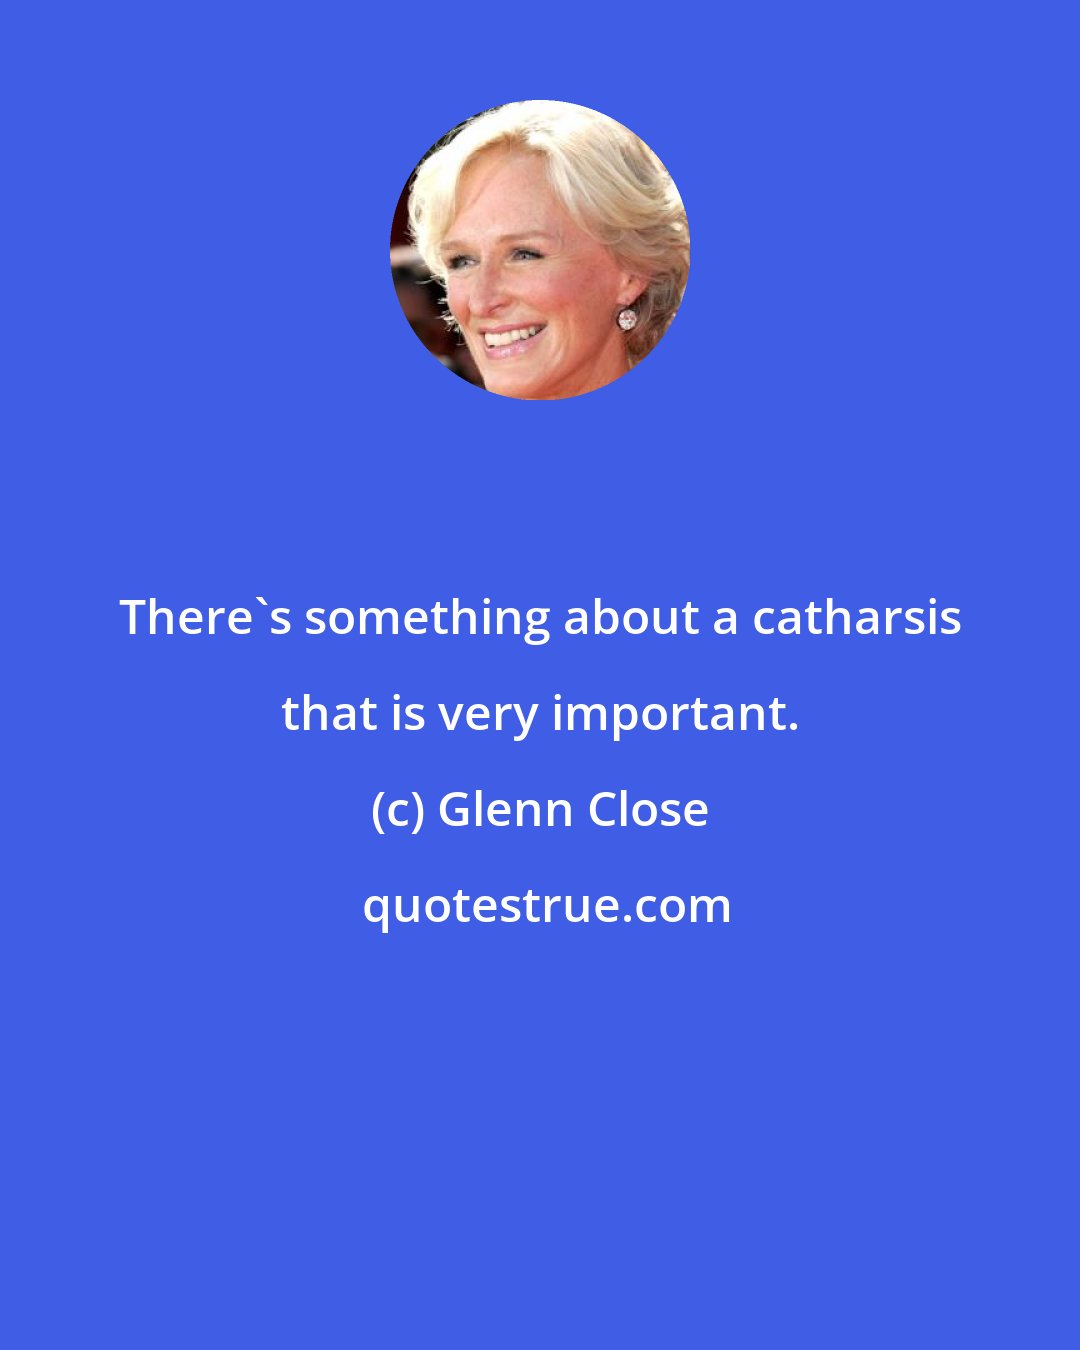 Glenn Close: There's something about a catharsis that is very important.